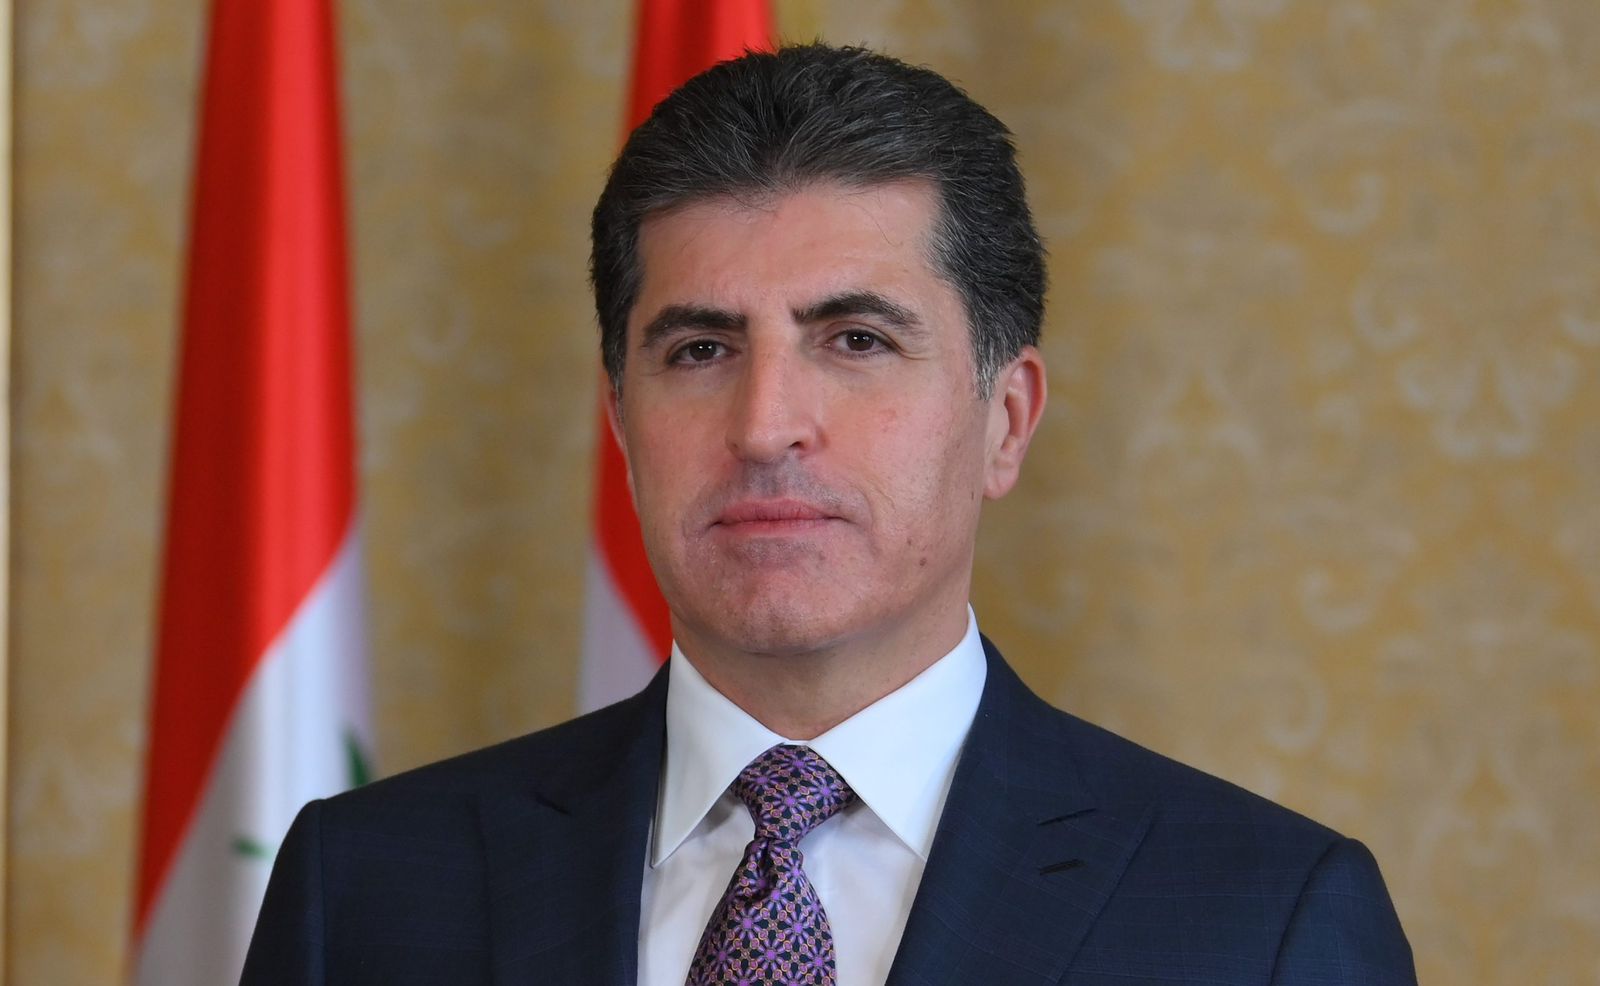 Kurdistan's president extends condolences to Iraqi Foreign FM on his wife's demise